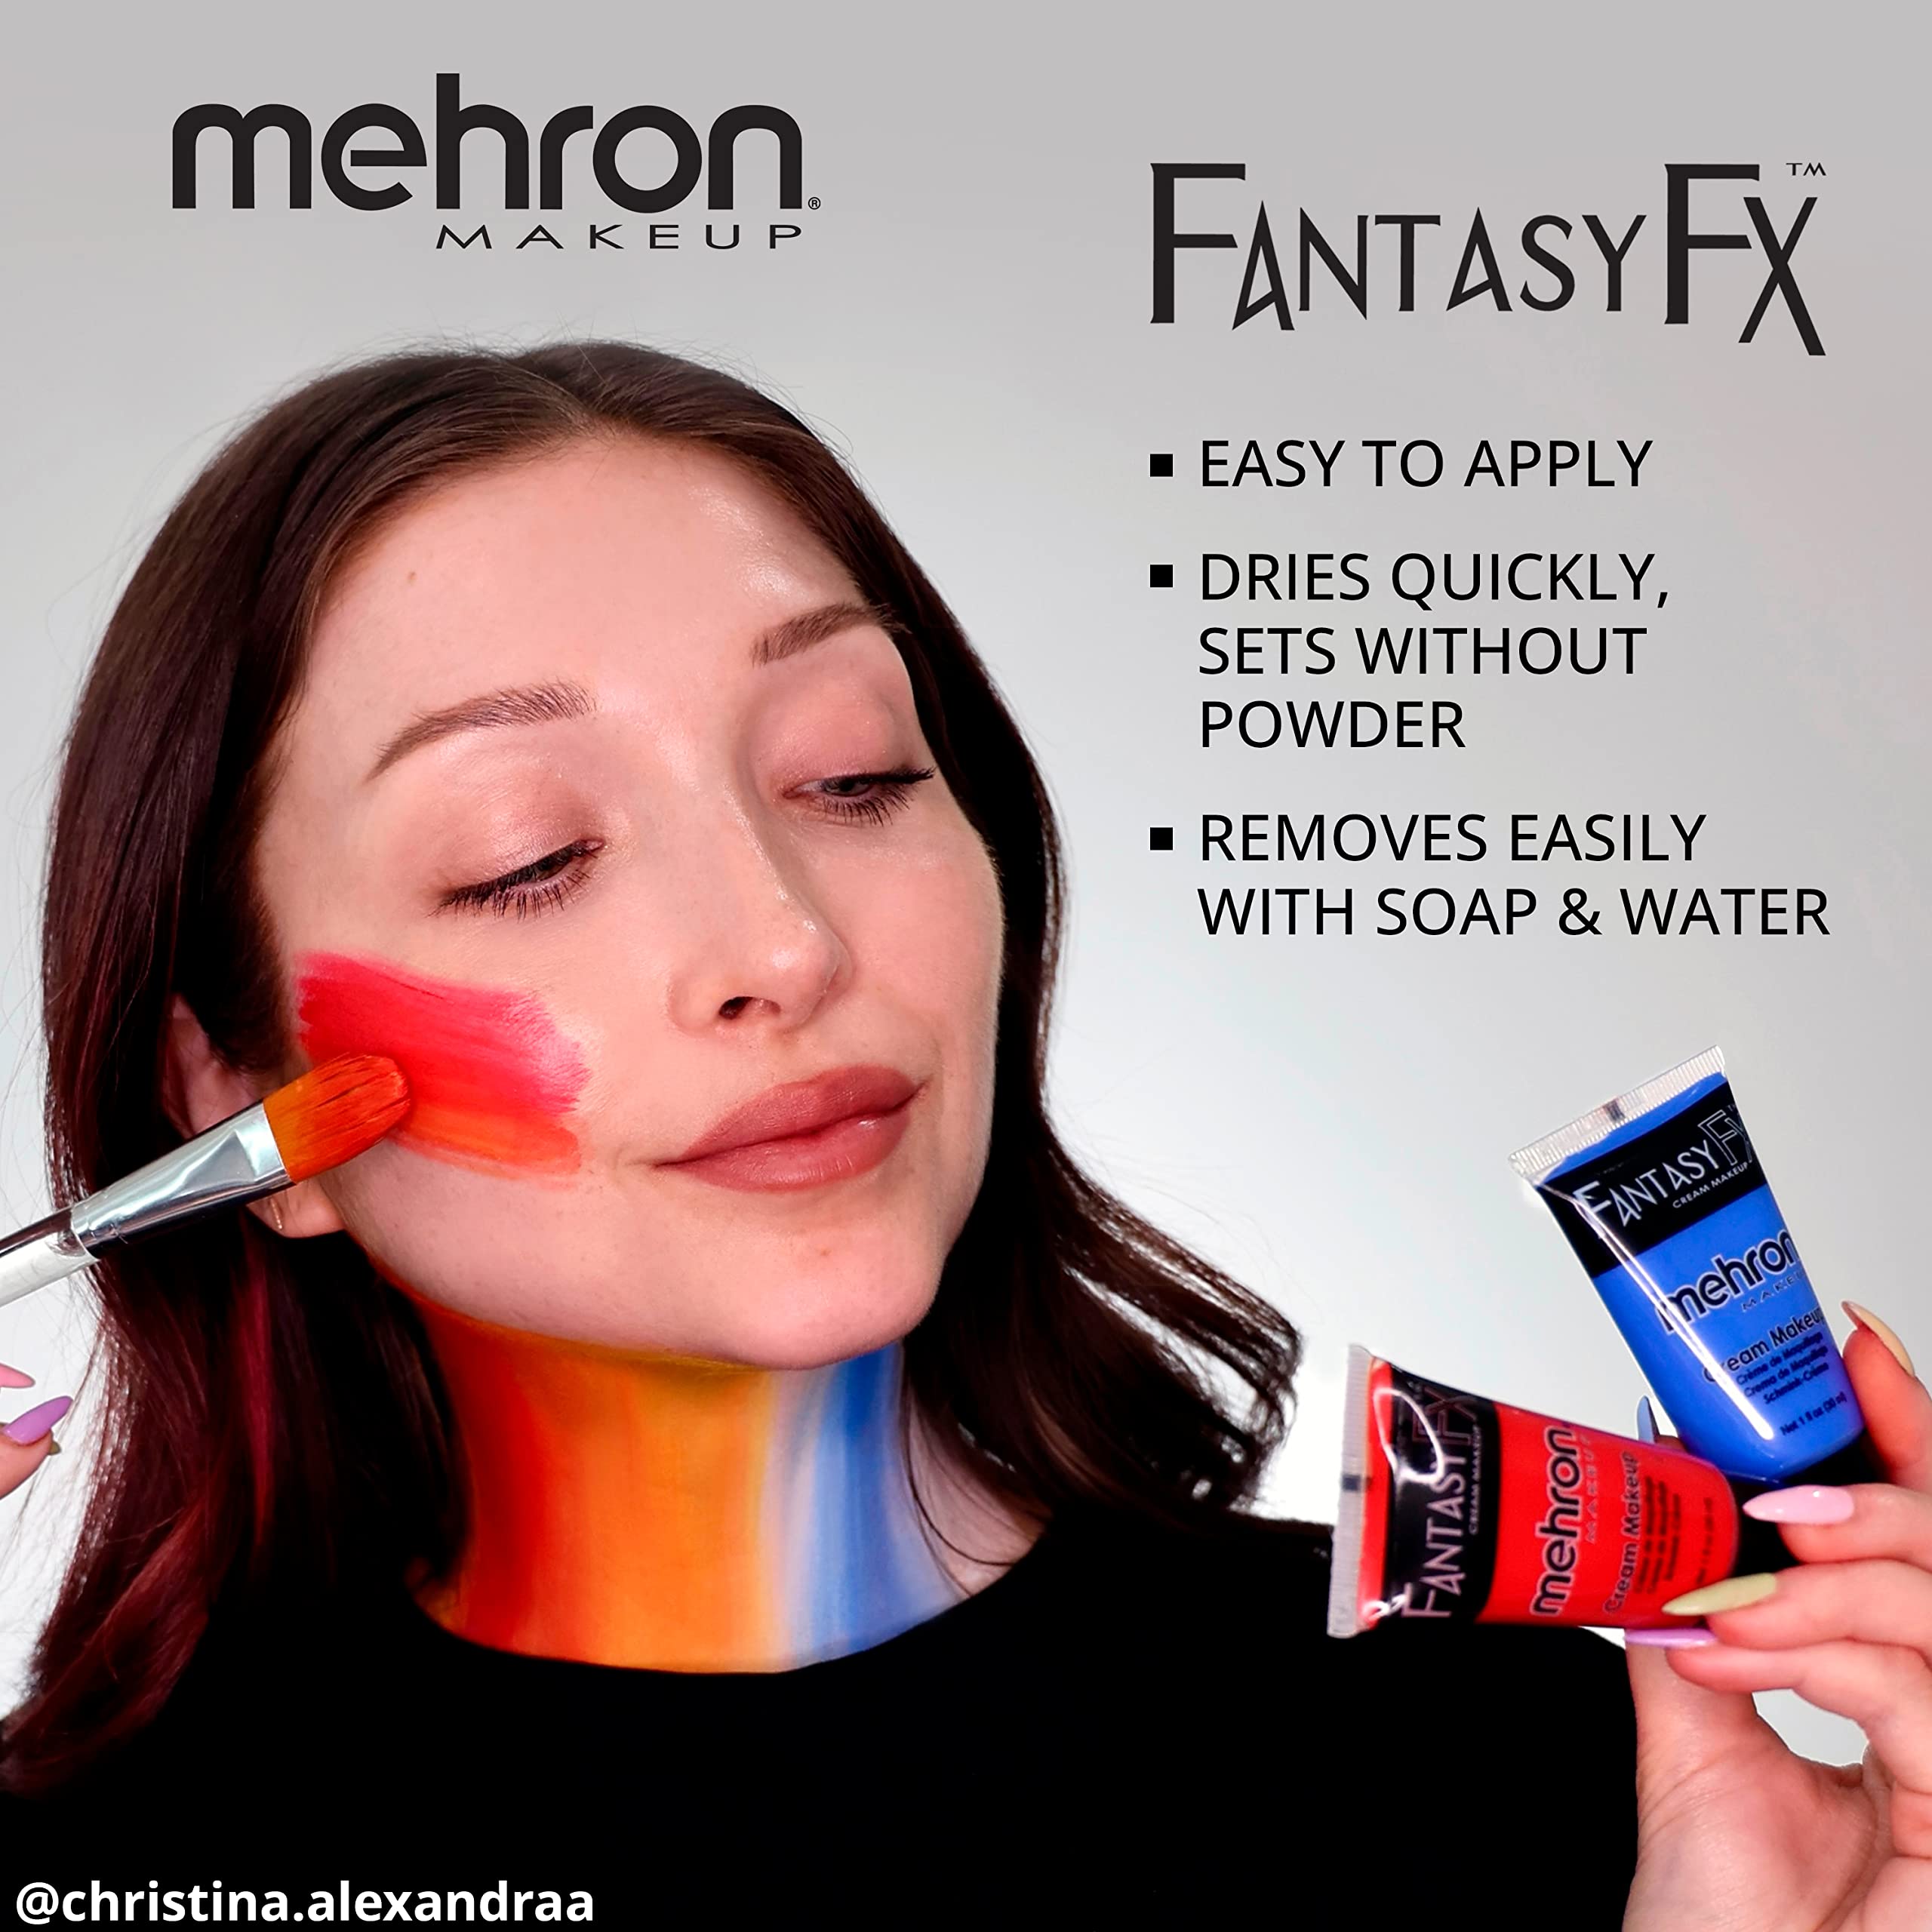 Mehron Makeup Fantasy FX Cream Makeup | Water Based Halloween Makeup | Red Face Paint & Body Paint For Adults 1 fl oz (30ml) (RED)